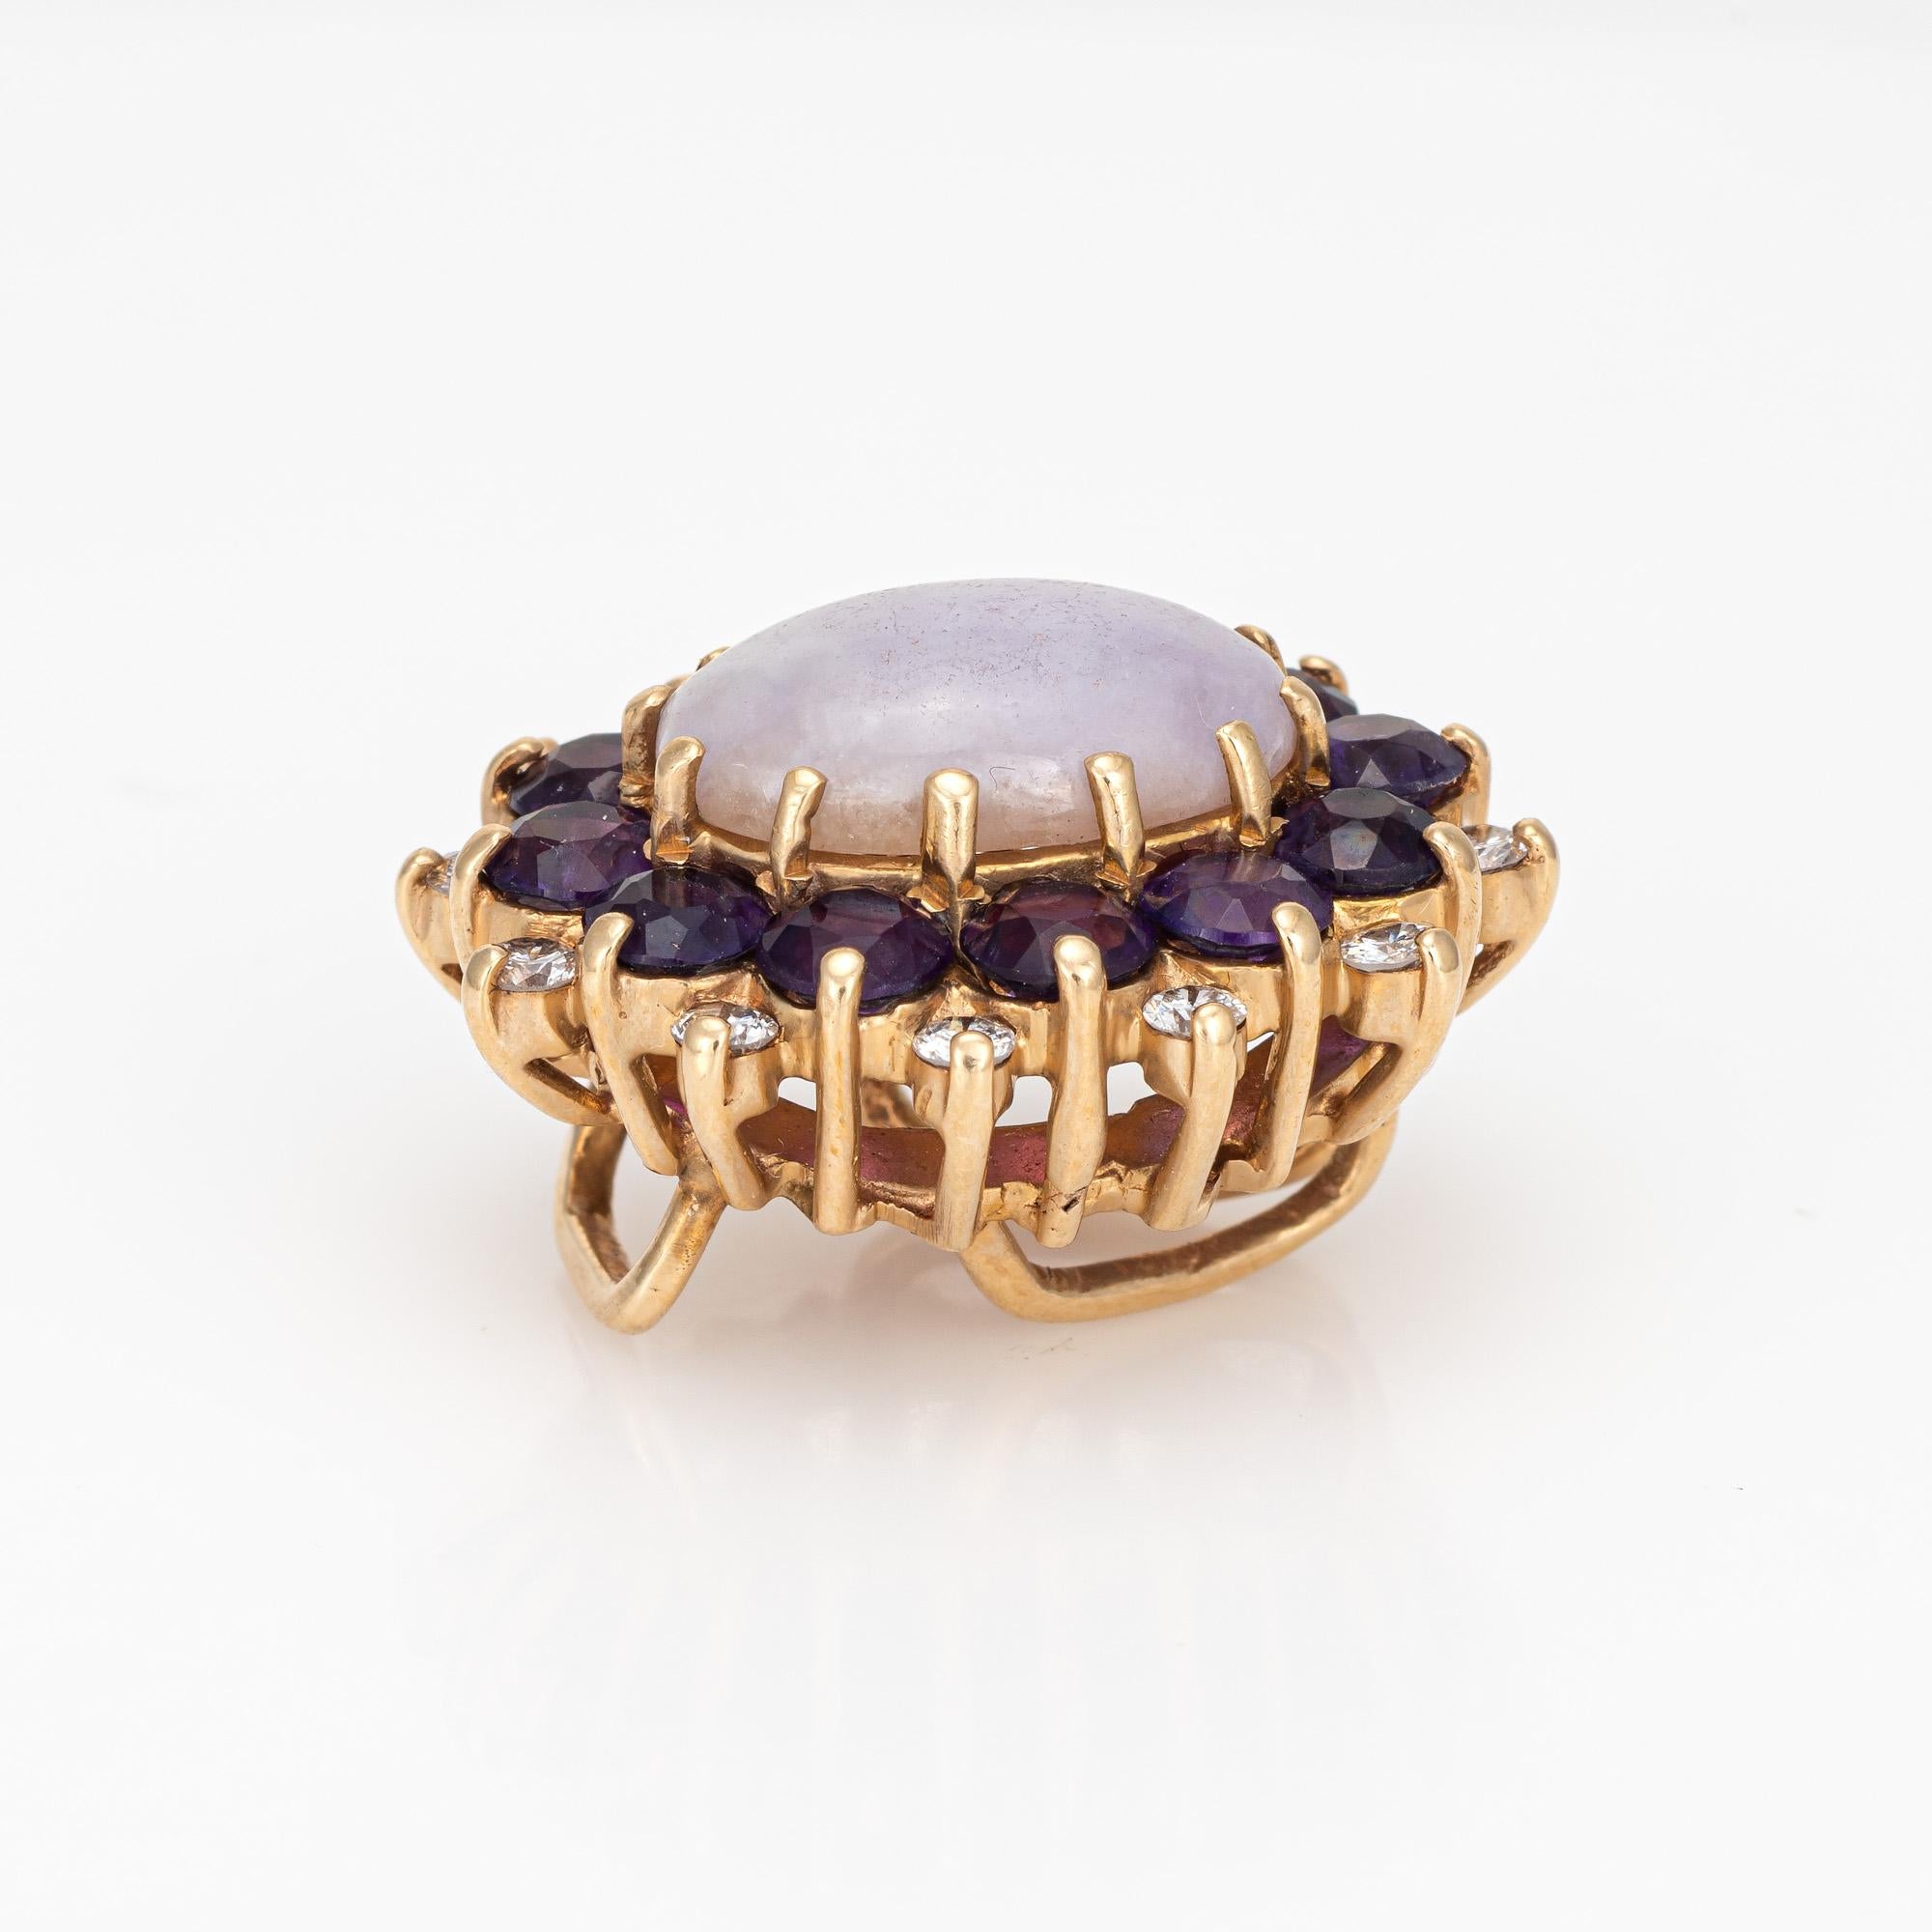 Finely detailed vintage lavender jade, amethyst & diamonds pendant crafted in 14 karat yellow gold (circa 1970s to 1980s). 

Twelve diamonds total an estimated 0.48 carats (estimated at I-J color and SI2-I2 clarity). Amethysts total an estimated